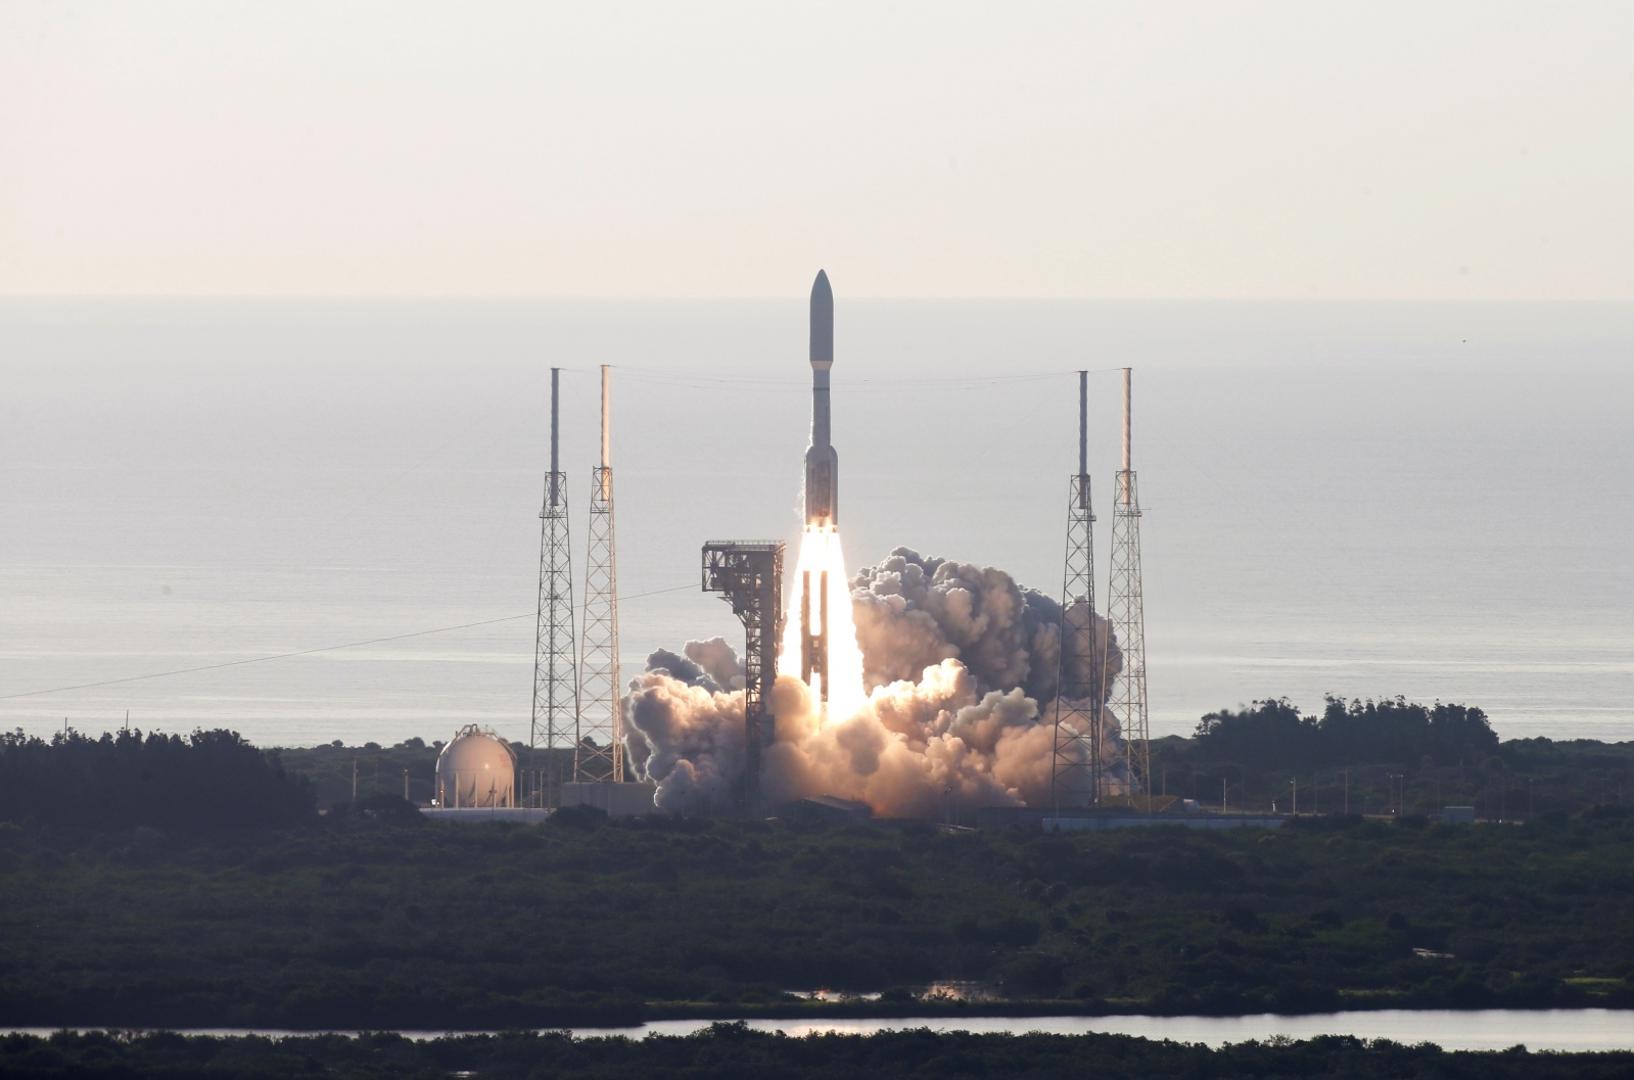 NASA's Mars 2020 Perseverance Rover launch in Cape Canaveral A United Launch Alliance Atlas V rocket carrying NASA's Mars 2020 Perseverance Rover vehicle takes off from Cape Canaveral Space Force Station in Cape Canaveral, Florida, U.S. July 30, 2020.  REUTERS/Joe Skipper JOE SKIPPER